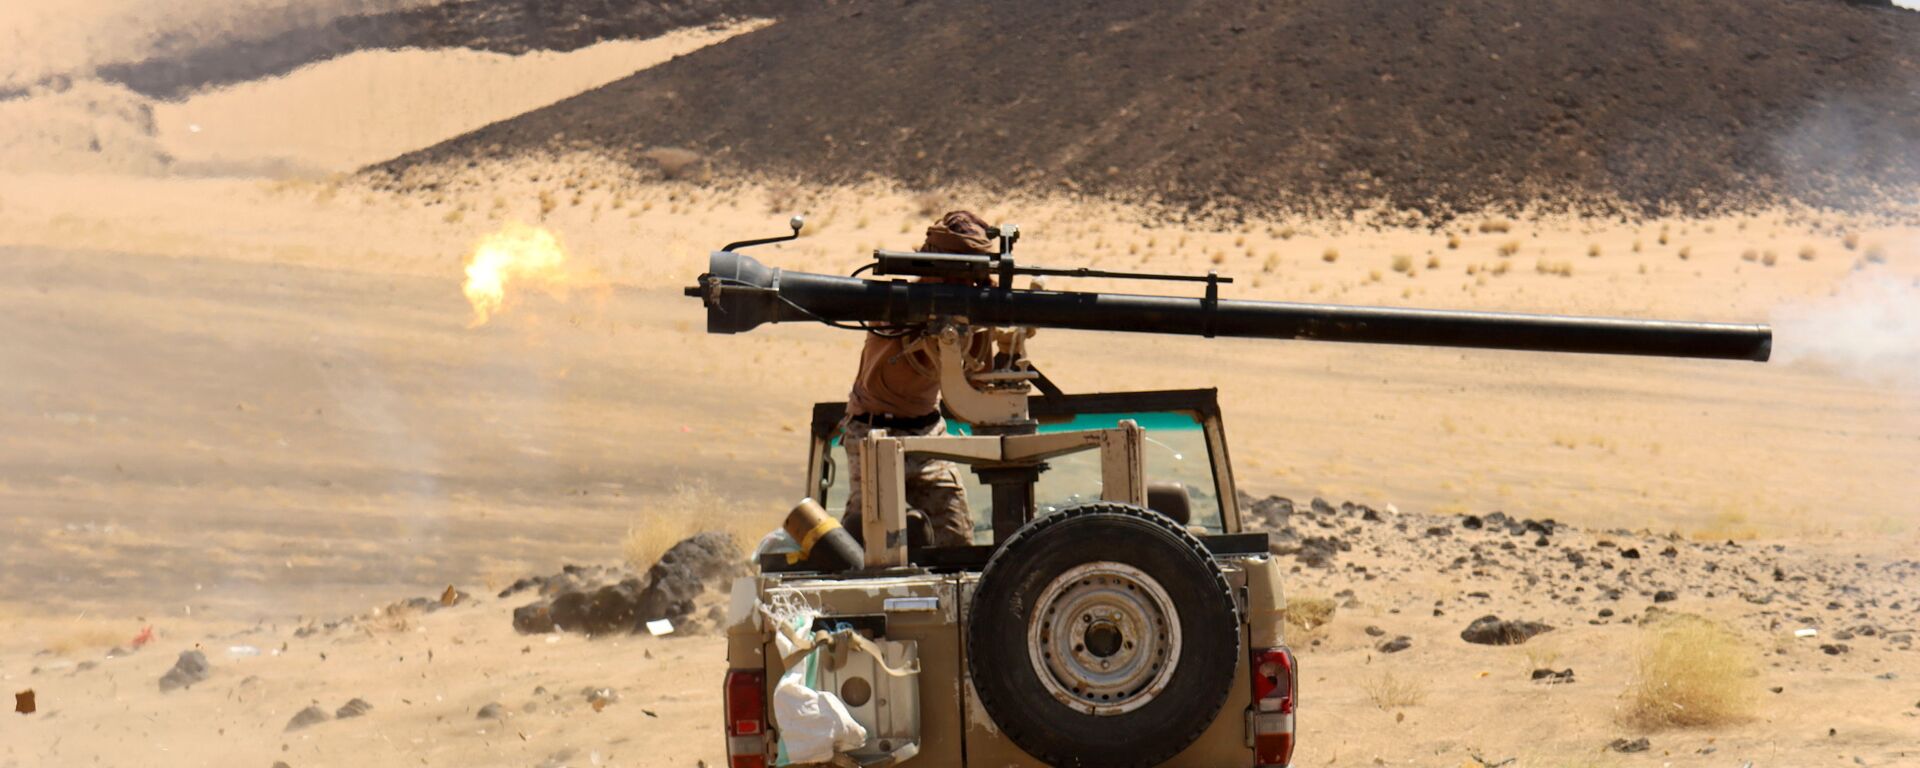 A Yemeni government fighter fires a vehicle-mounted weapon at a frontline position during fighting against Houthi fighters in Marib, Yemen March 9, 2021 - Sputnik International, 1920, 05.06.2021